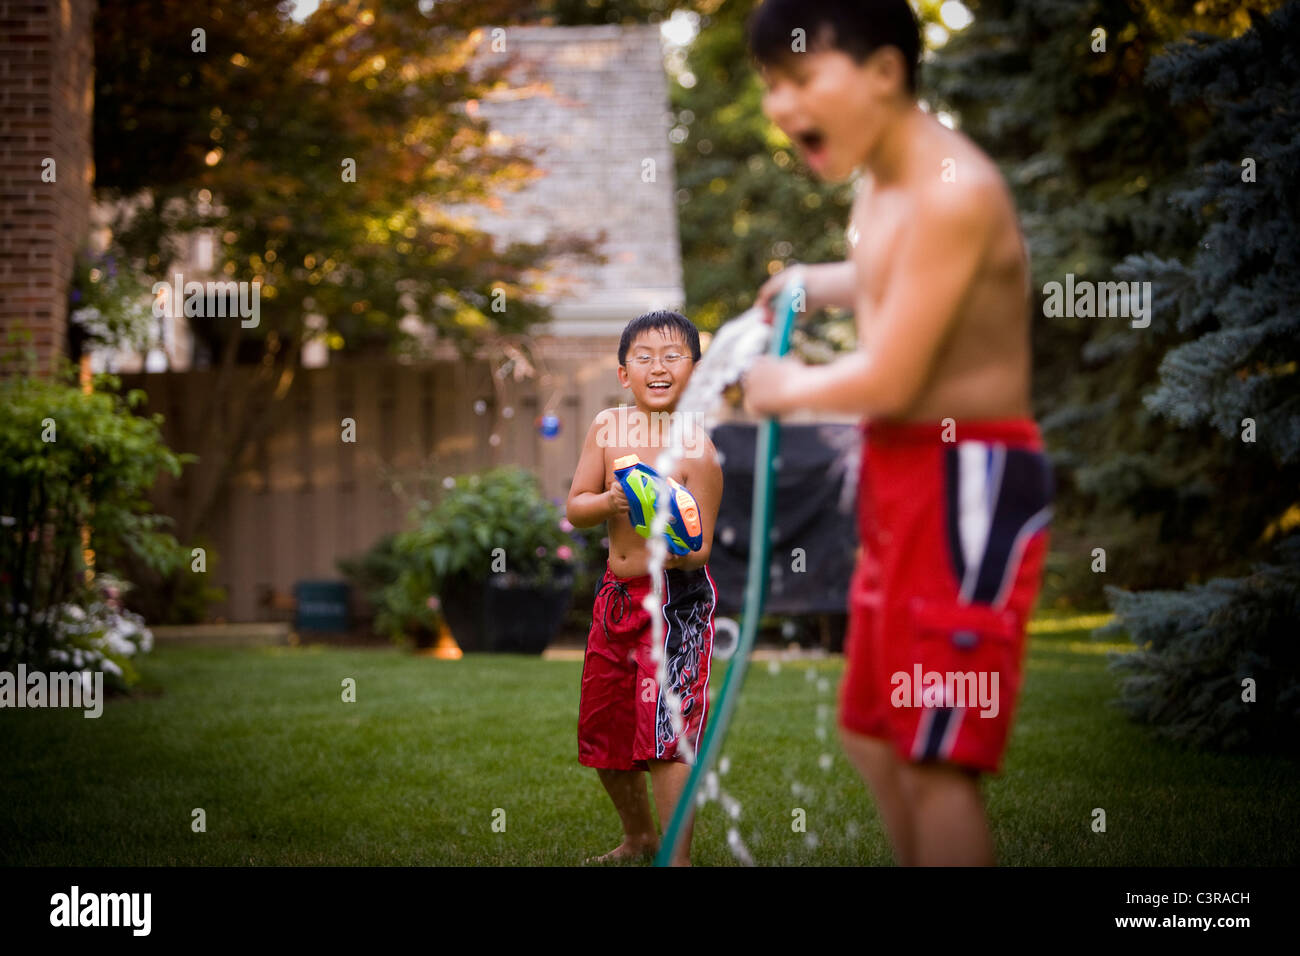 Young Boys Having A Water Fight In The Backyard Stock Photo